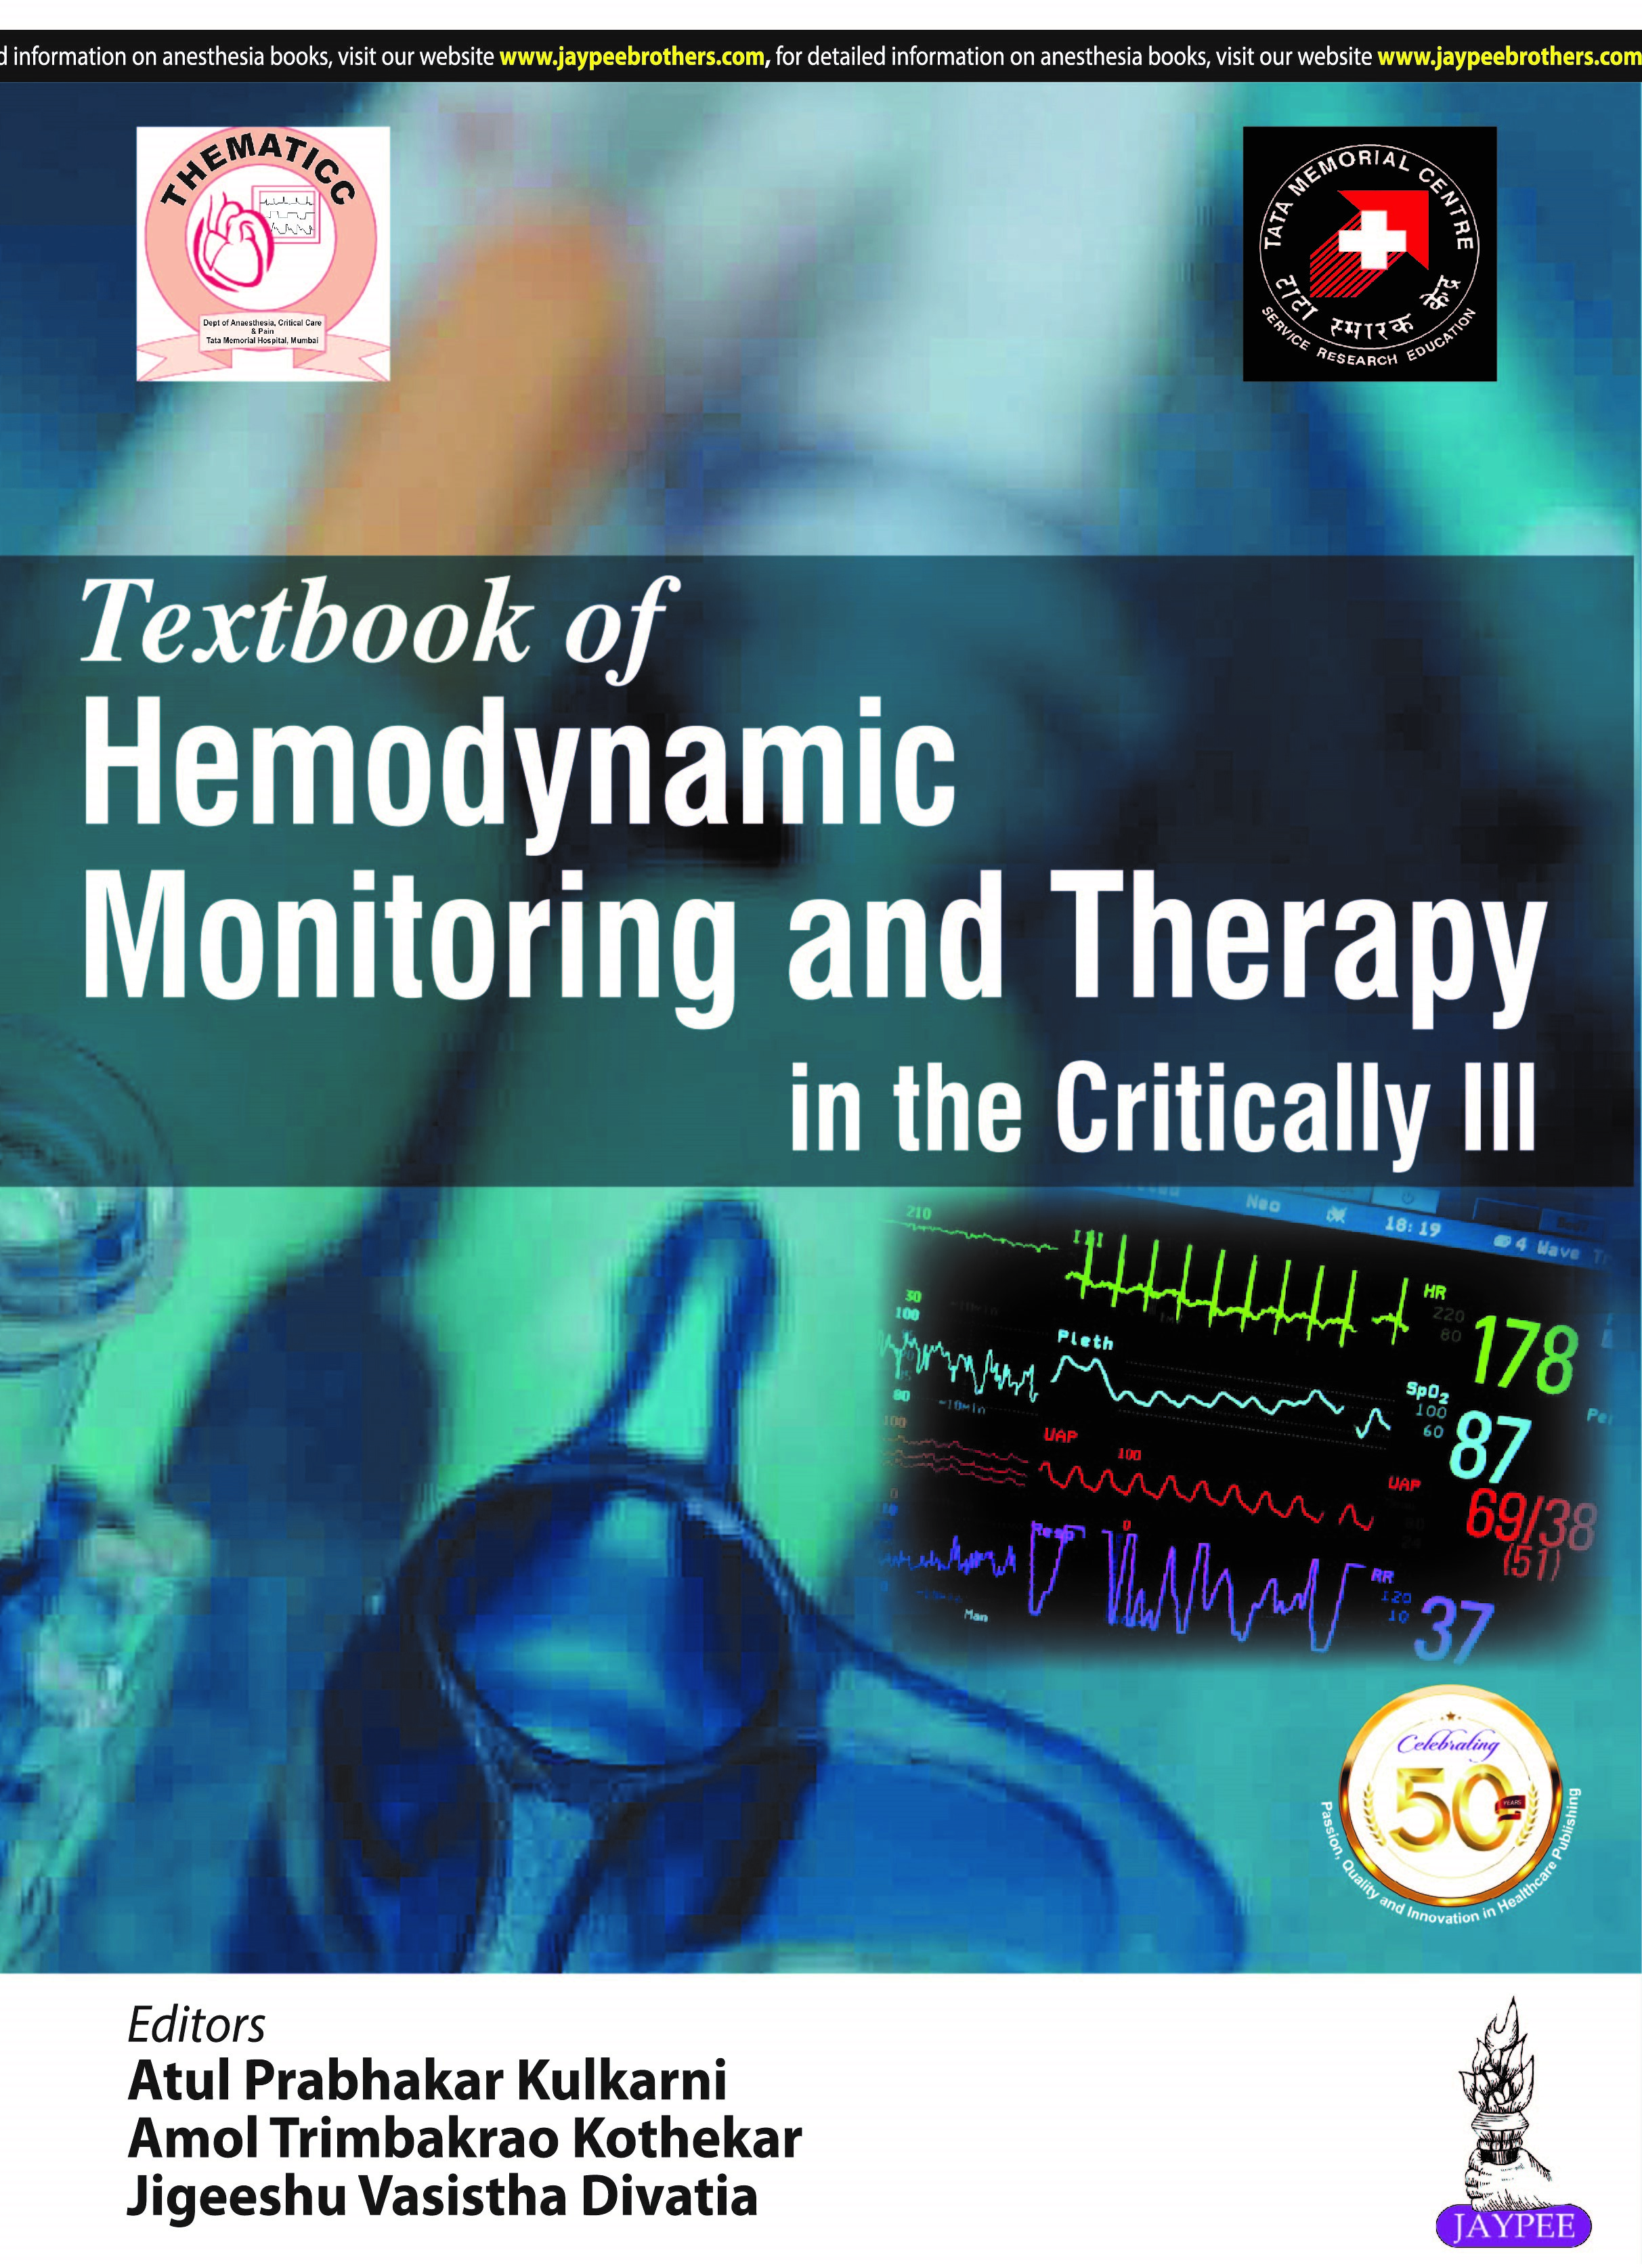 Textbook Of Hemodynamic Monitoring And Therapy In The Critically Ill
